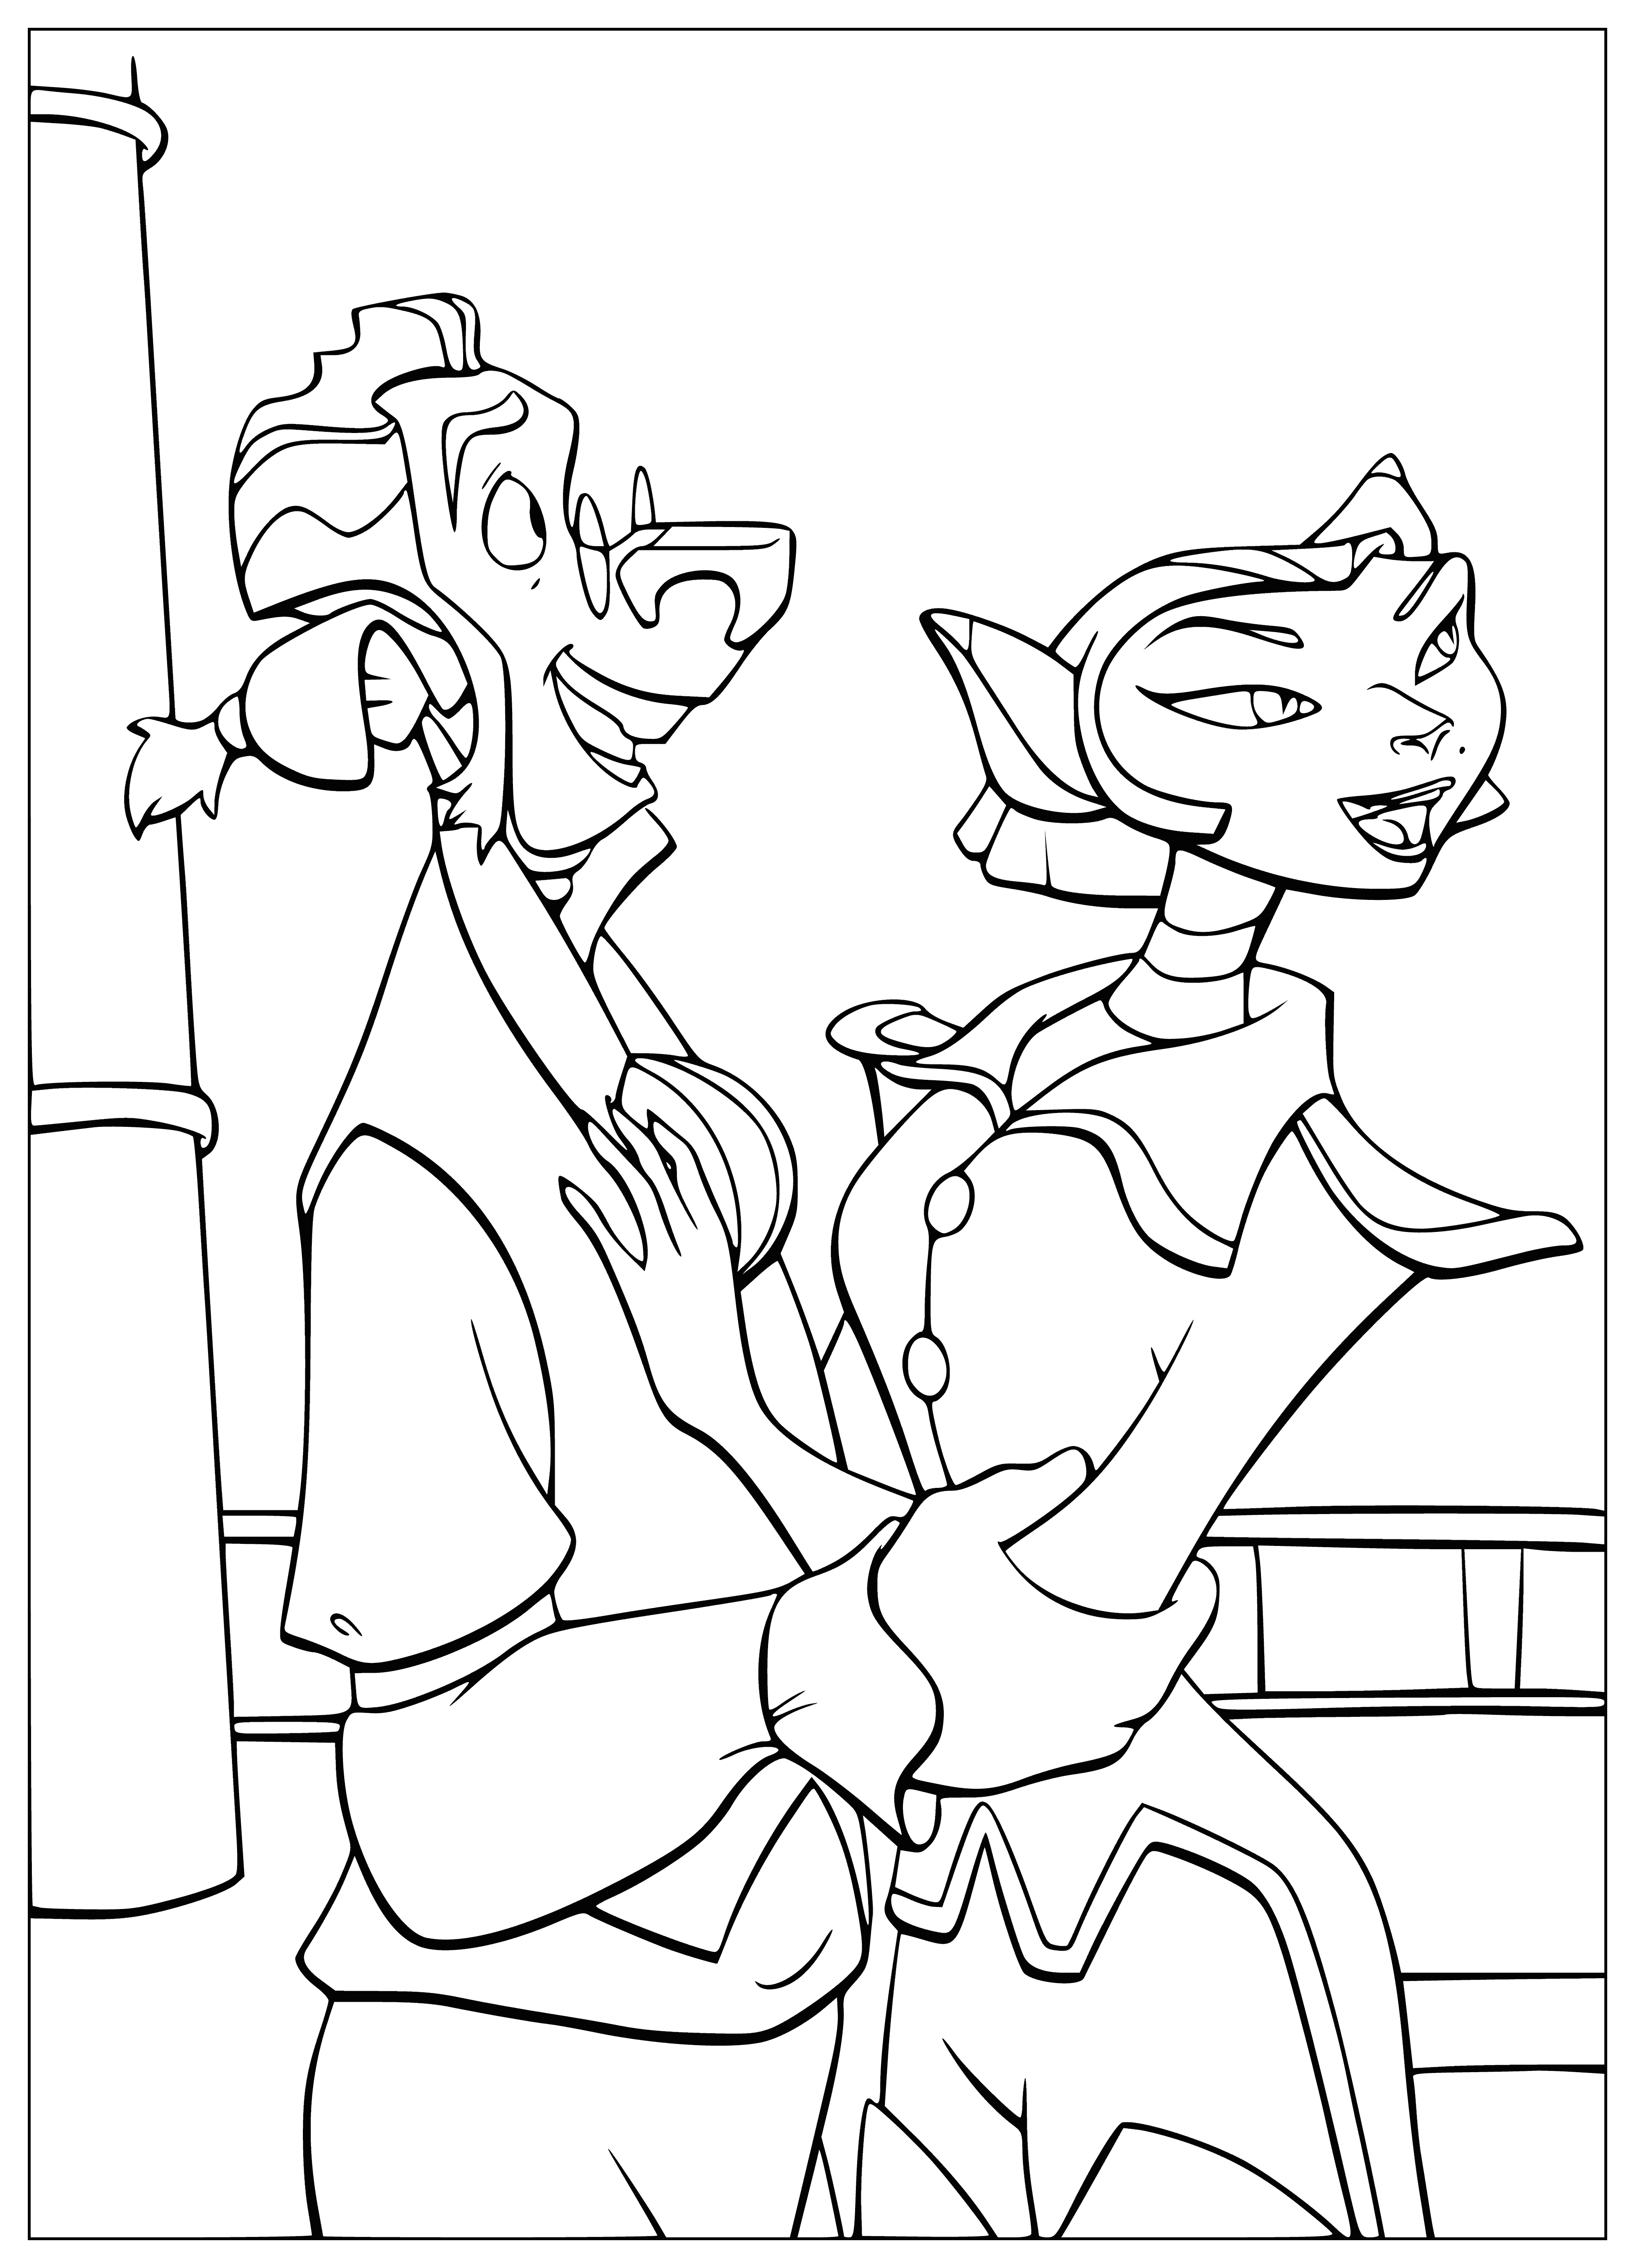 Doctor and captain coloring page